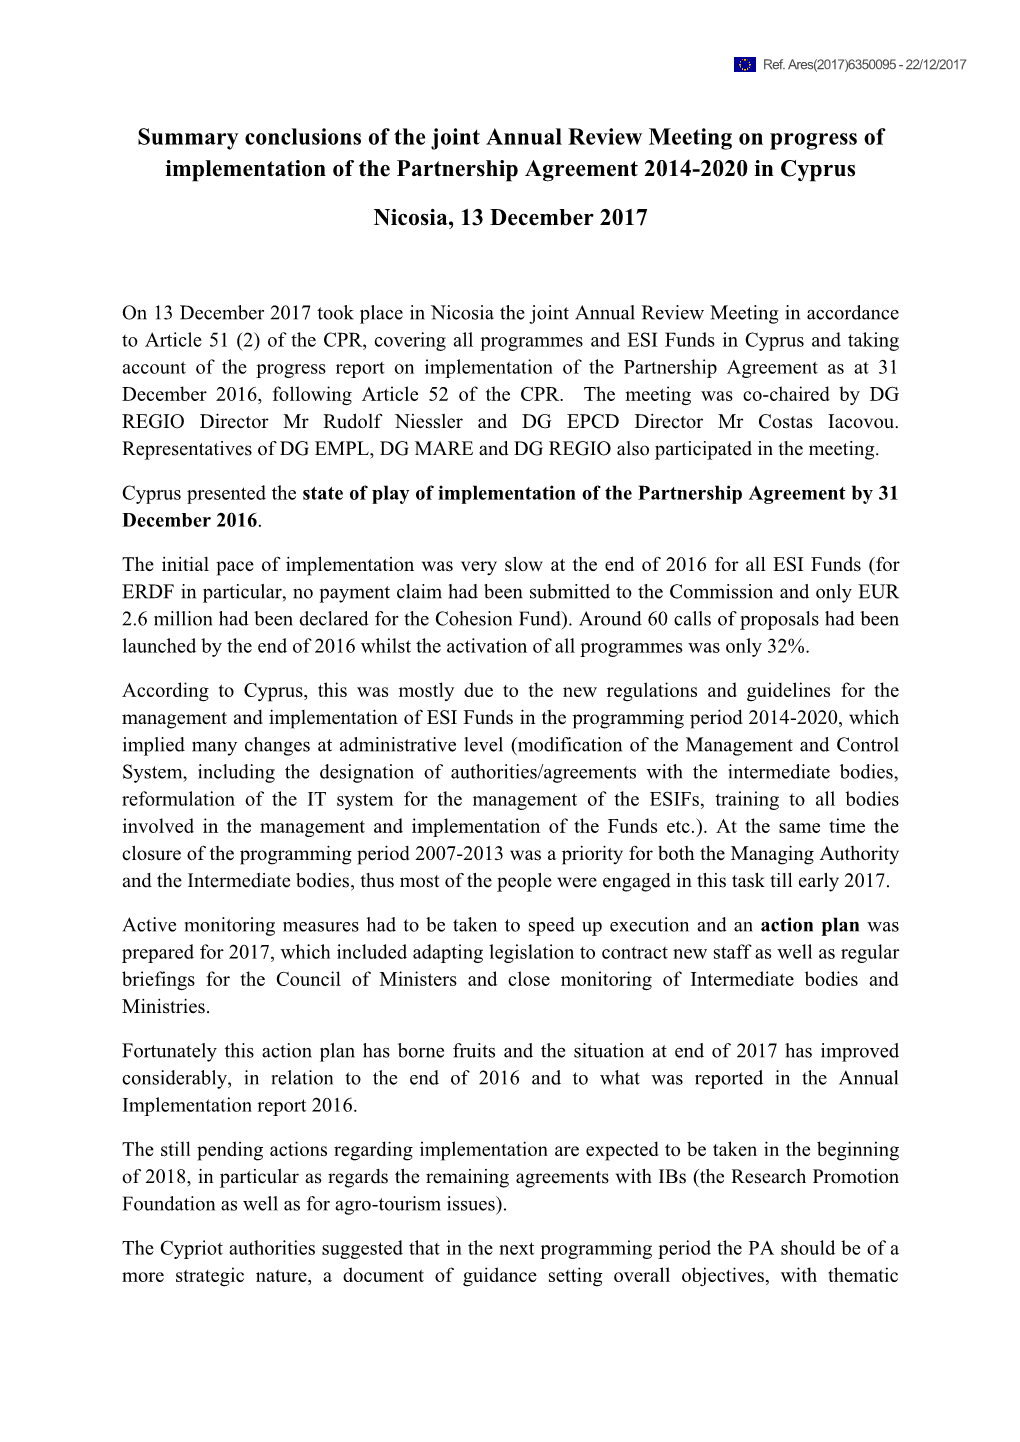 Summary Conclusions of the Joint Annual Review Meeting on Progress of Implementation of the Partnership Agreement 2014-2020 in Cyprus